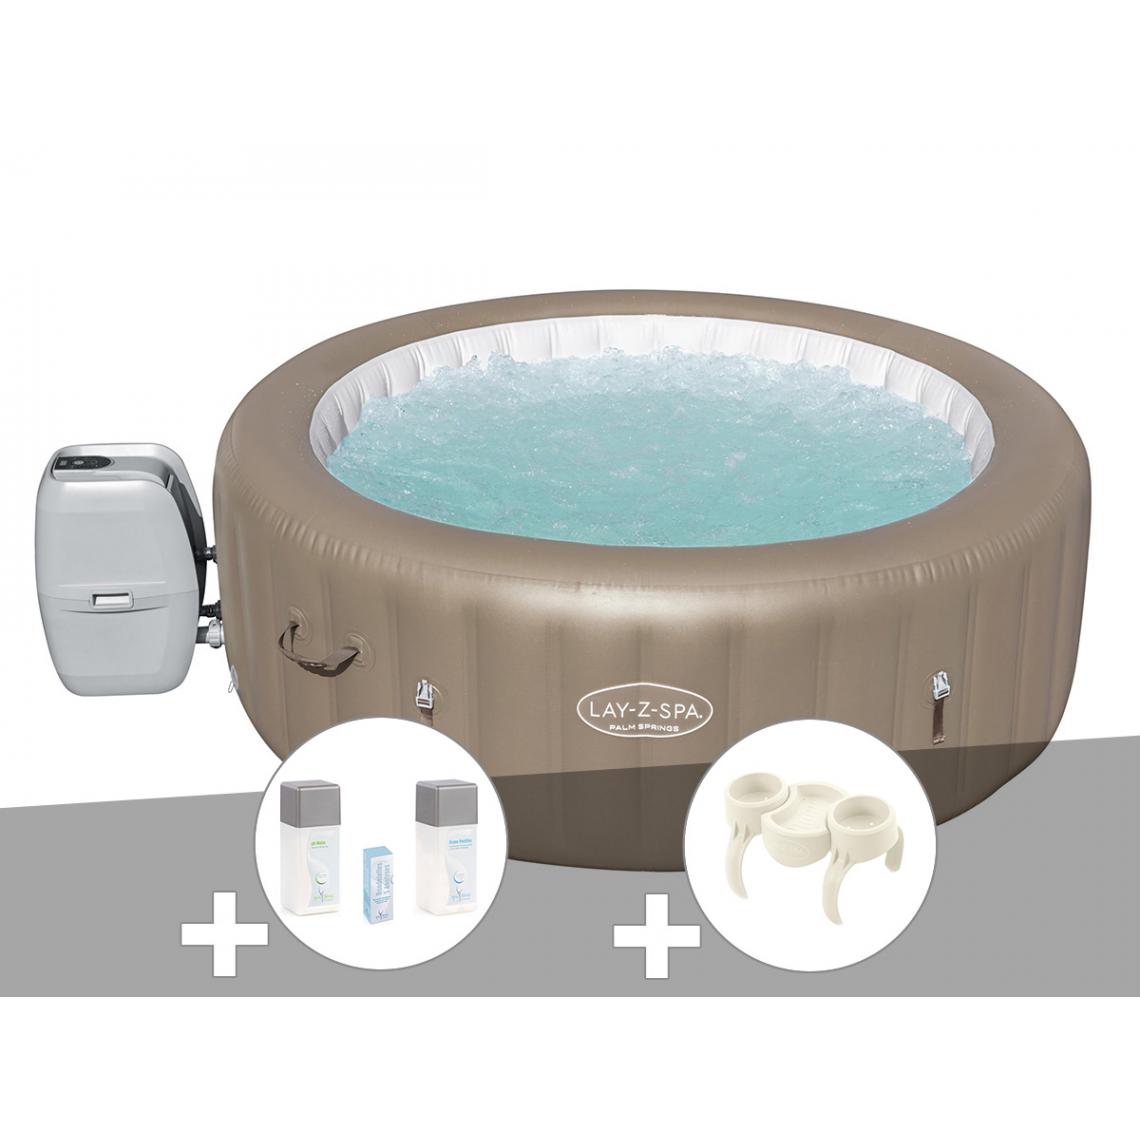 Bestway - Kit spa gonflable Bestway Lay-Z-Spa Palm Springs rond Airjet 4/6 places + Kit traitement brome + Porte-gobelets - Spa gonflable